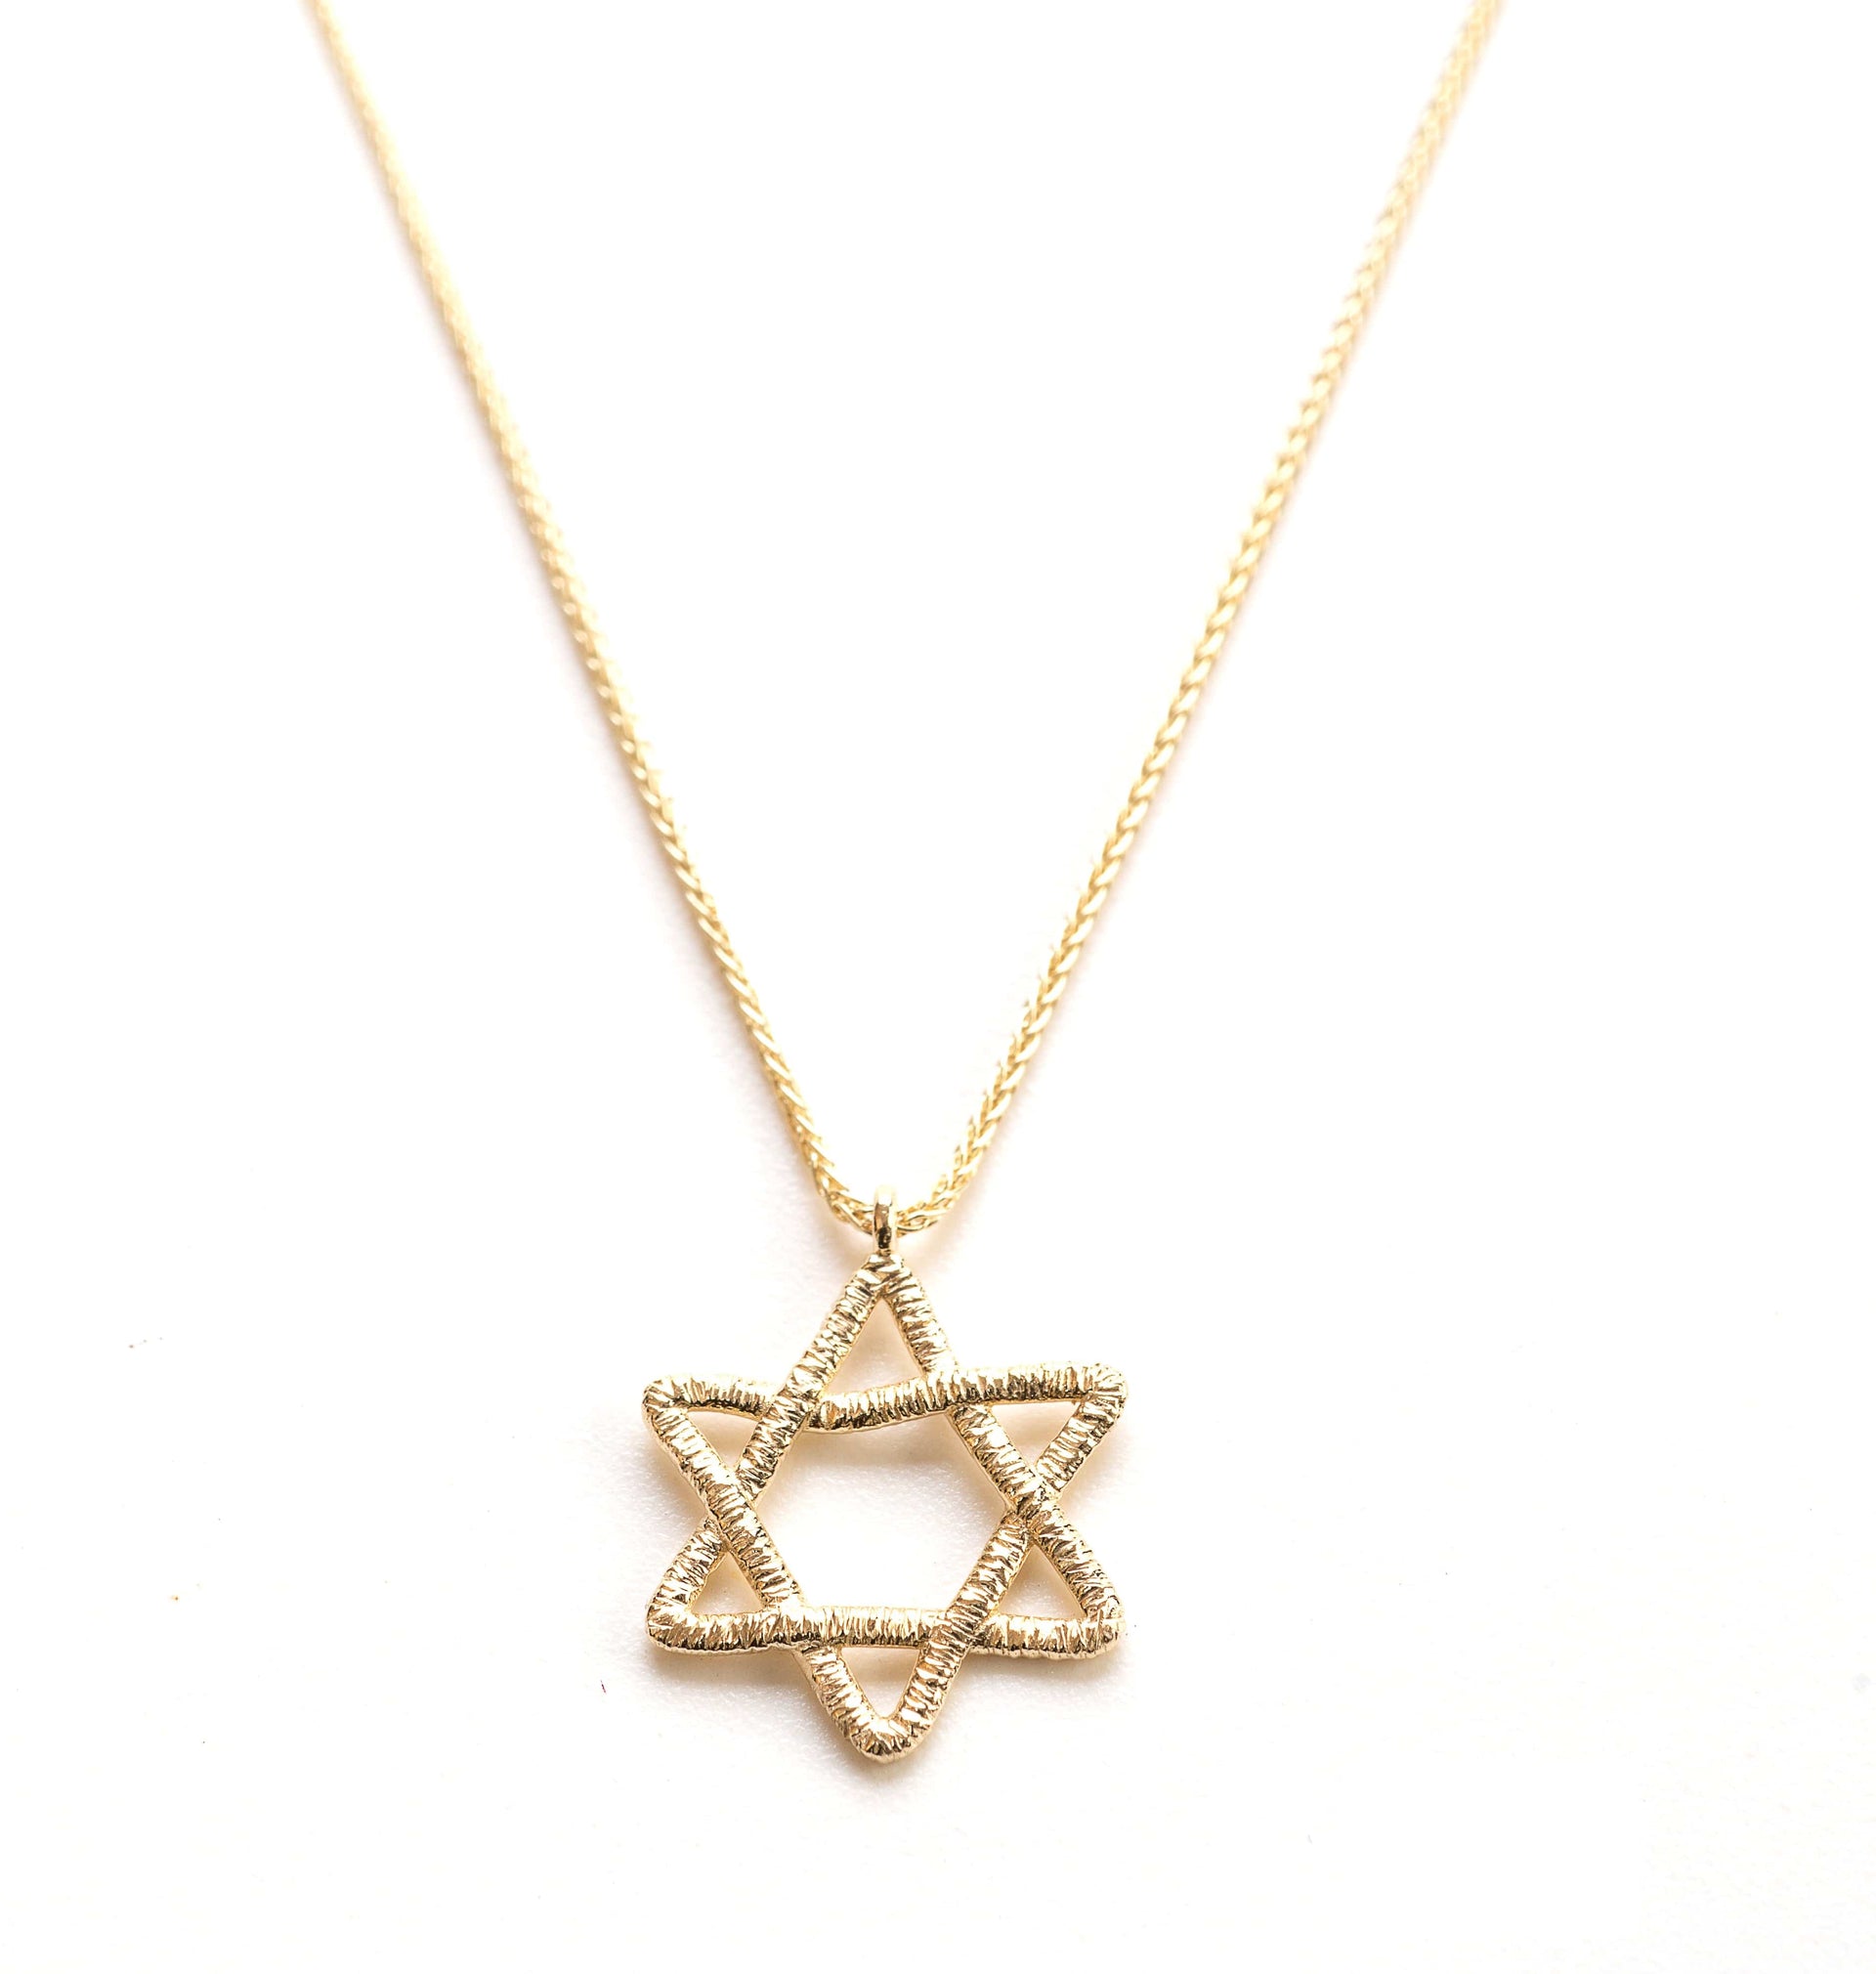 Israel Museum Necklaces Gold 14K Gold Star of David Necklace by Israel Museum